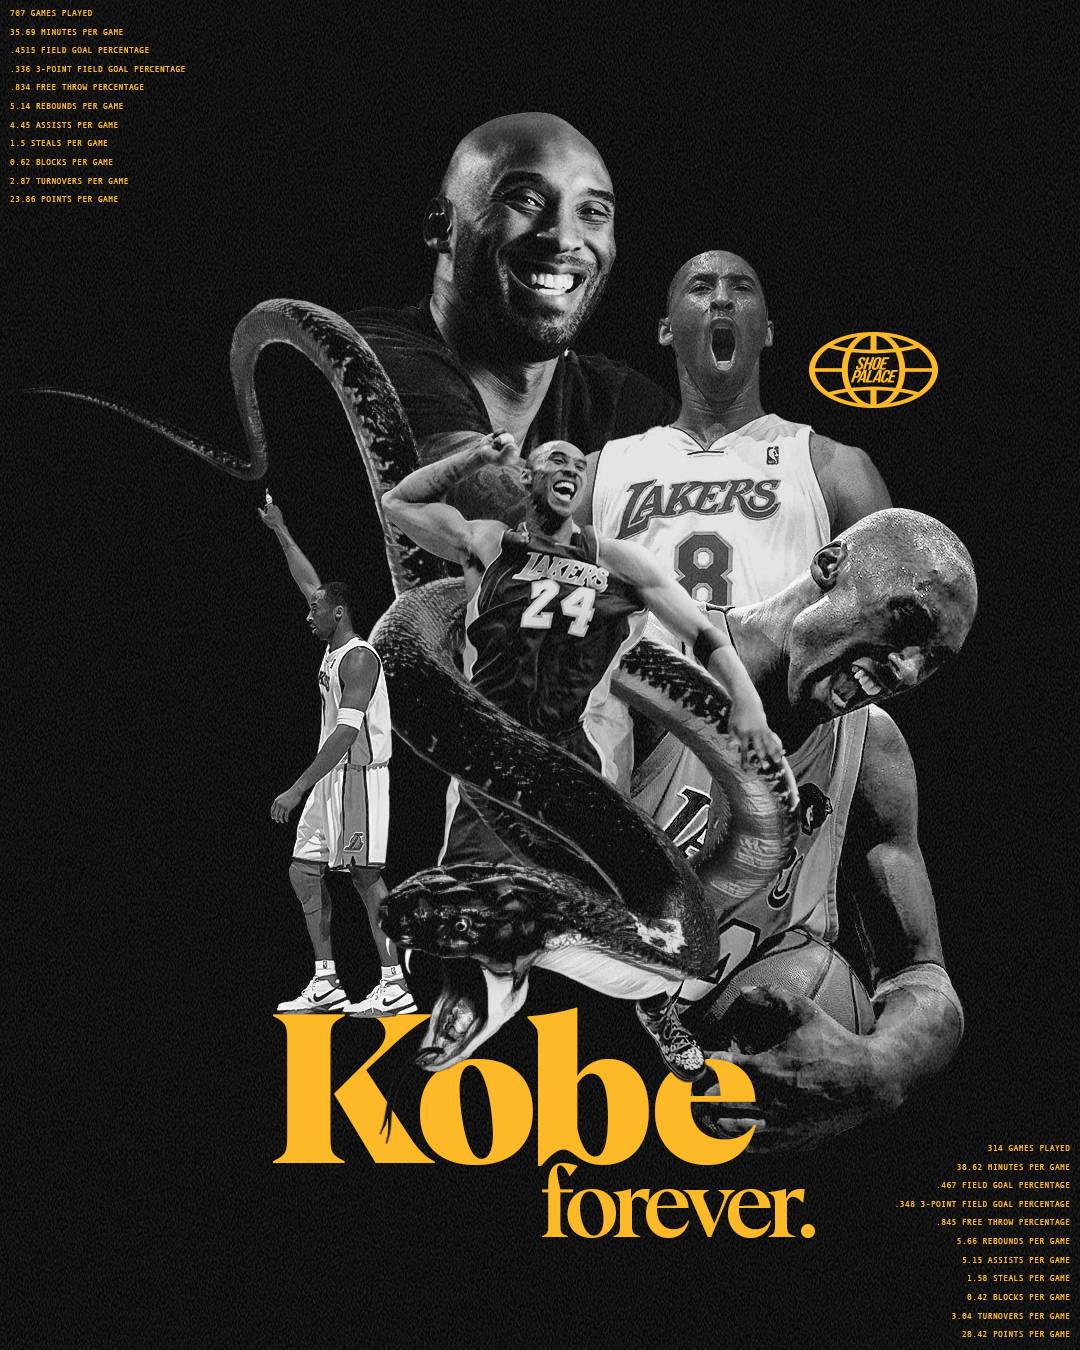 How the Lakers and Nike are honoring Kobe Bryant on Mamba Day